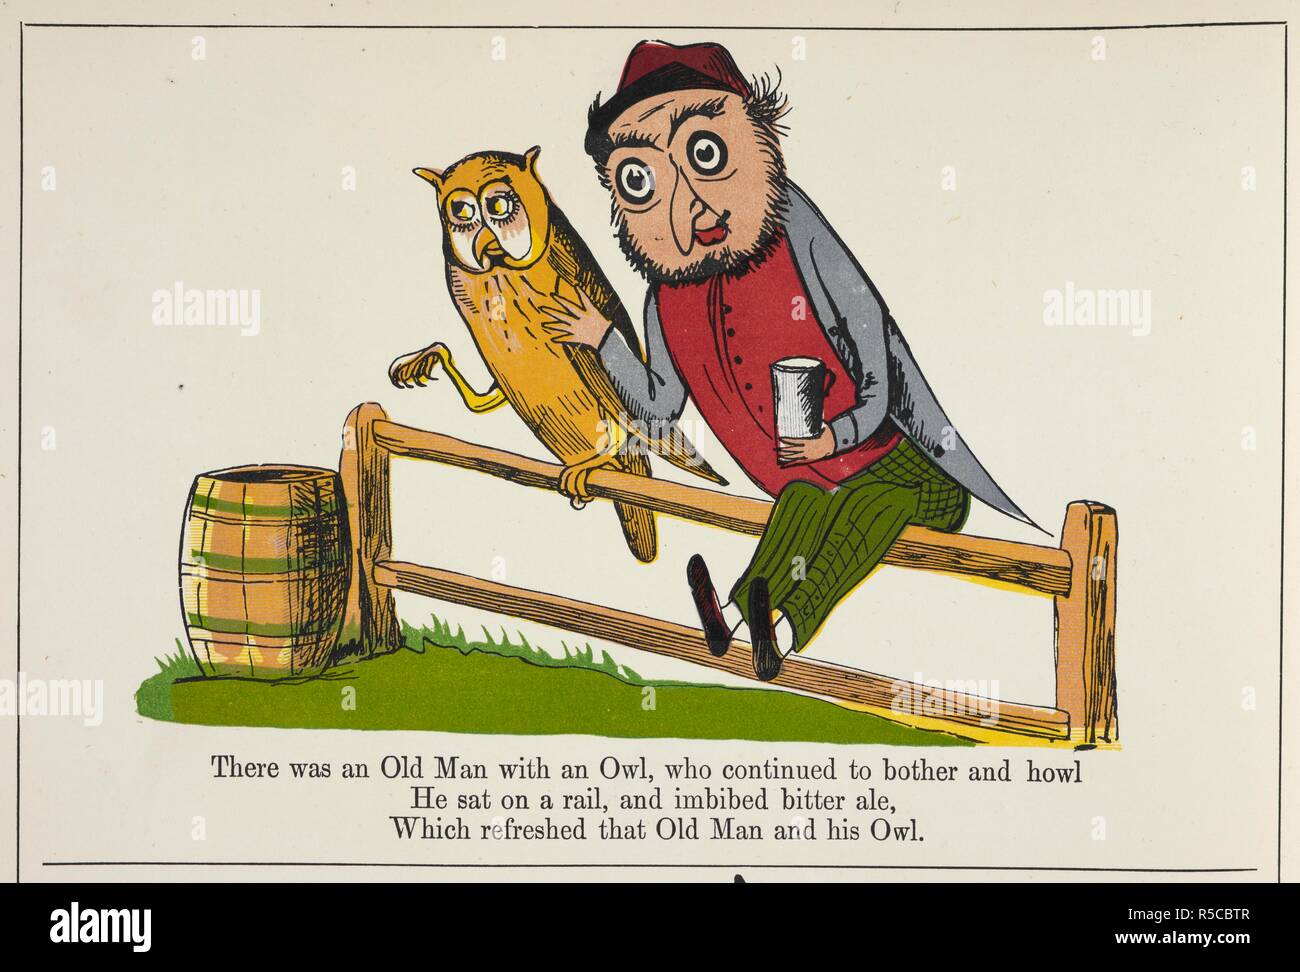 A humorous poem about a man with a owl. A Book of Nonsense. [With illustrations.]. London : Frederick Warne & Co., [1885?]. Source: 12332.dd.21. Author: LEAR, EDWARD. Stock Photo